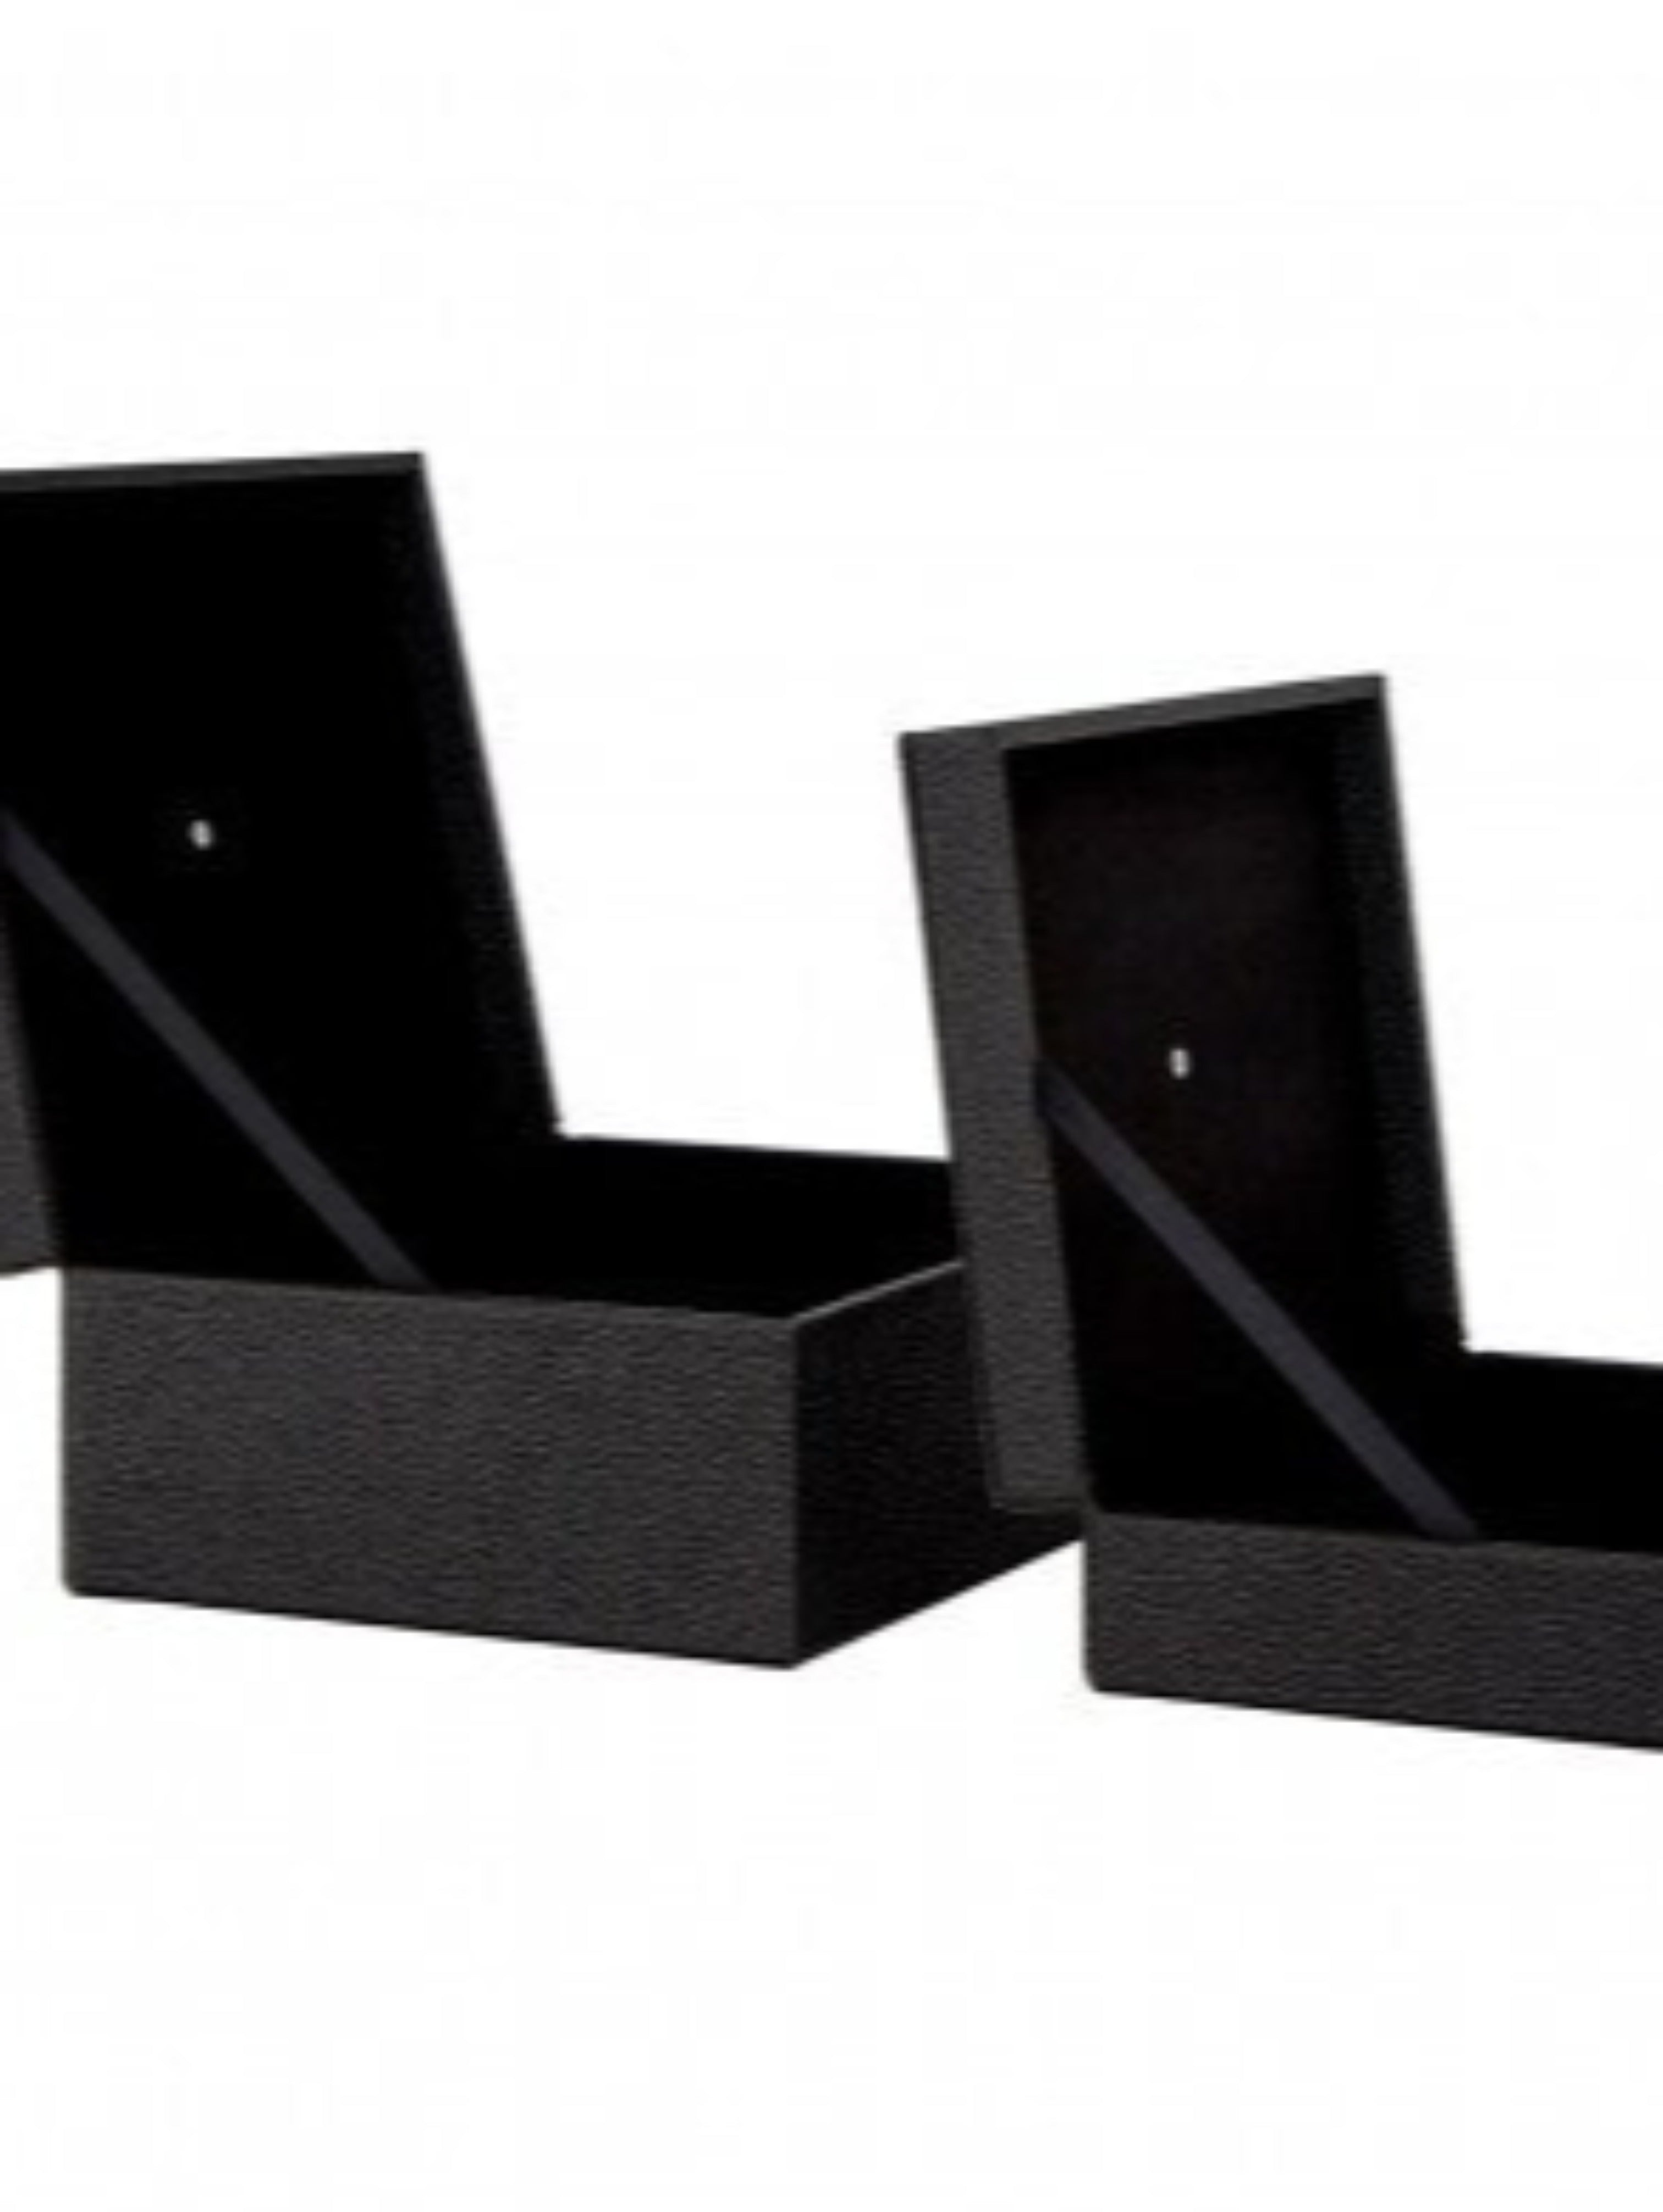 Set of Two Black Faux Leather Storage Boxes with Ivory Handle